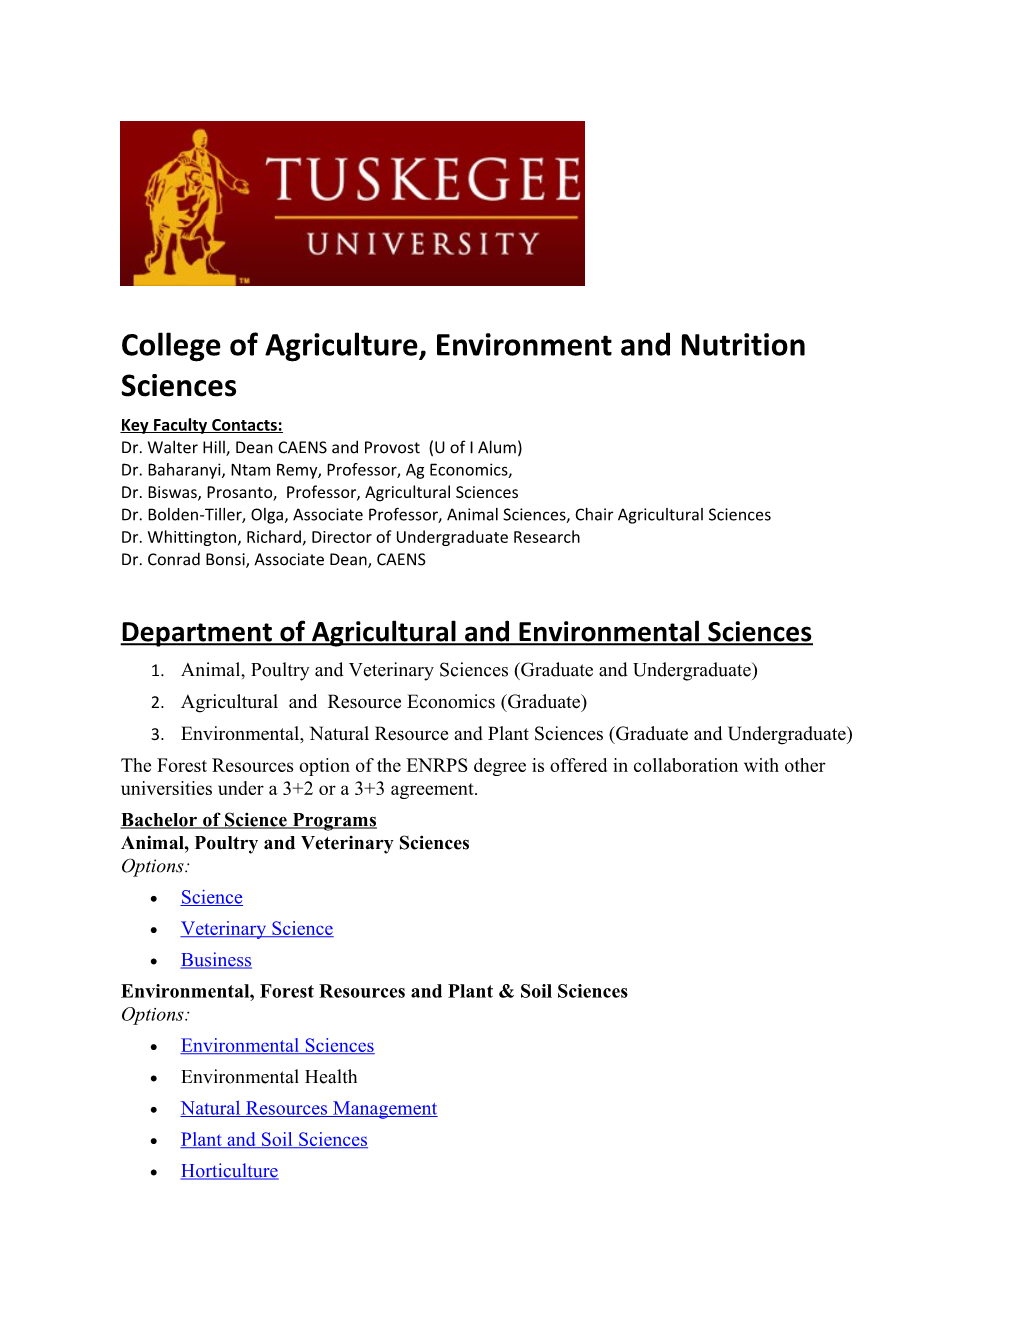 College of Agriculture, Environment and Nutrition Sciences